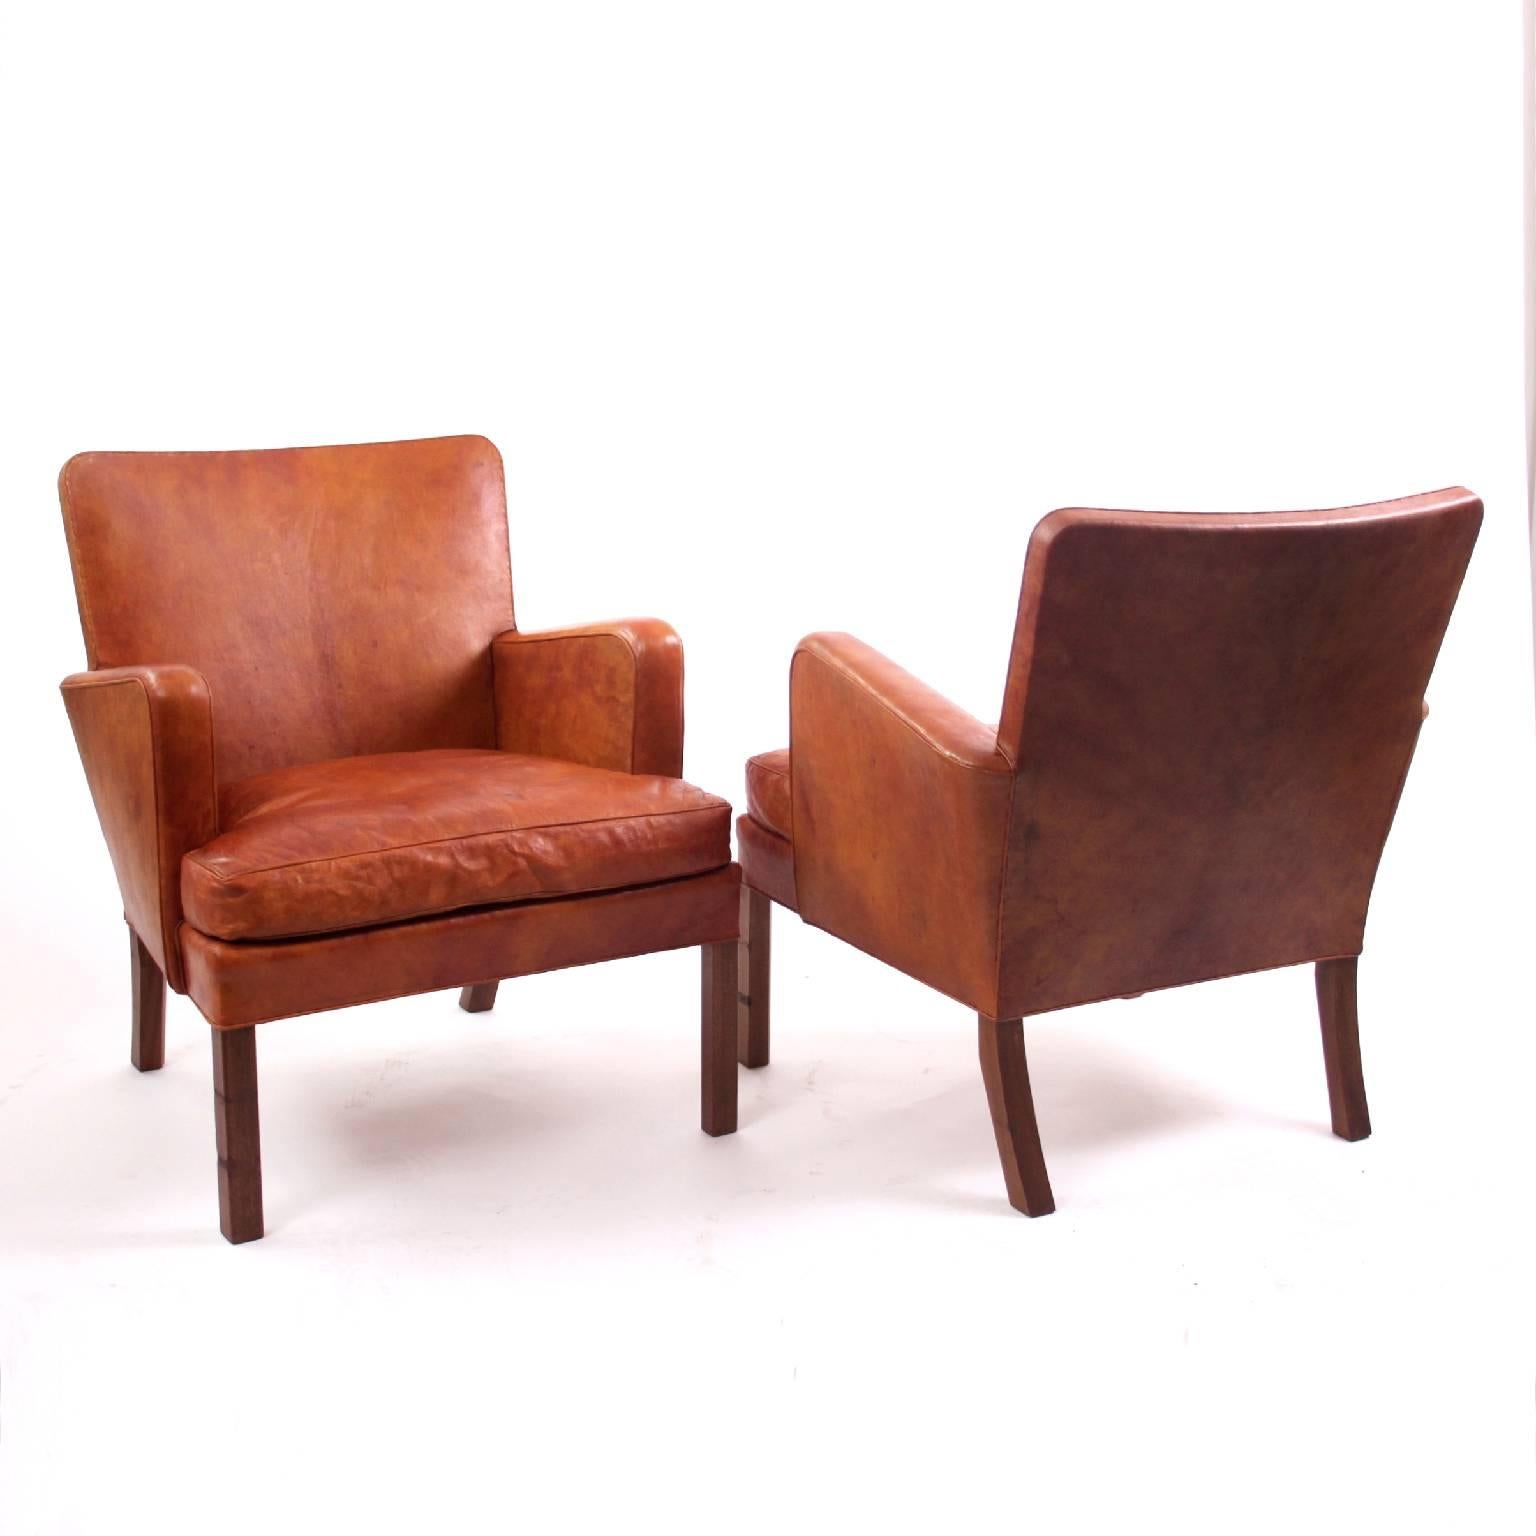 Kaare Klint & Rud Rasmussen

A rare pair of Kaare Klint chairs Model KK5313, manufactured by Rud Rasmussen Cabinetmakers.

The frame is crafted from solid mahogany and the seat/back is upholstered with patinated Niger leather. 

Underside of